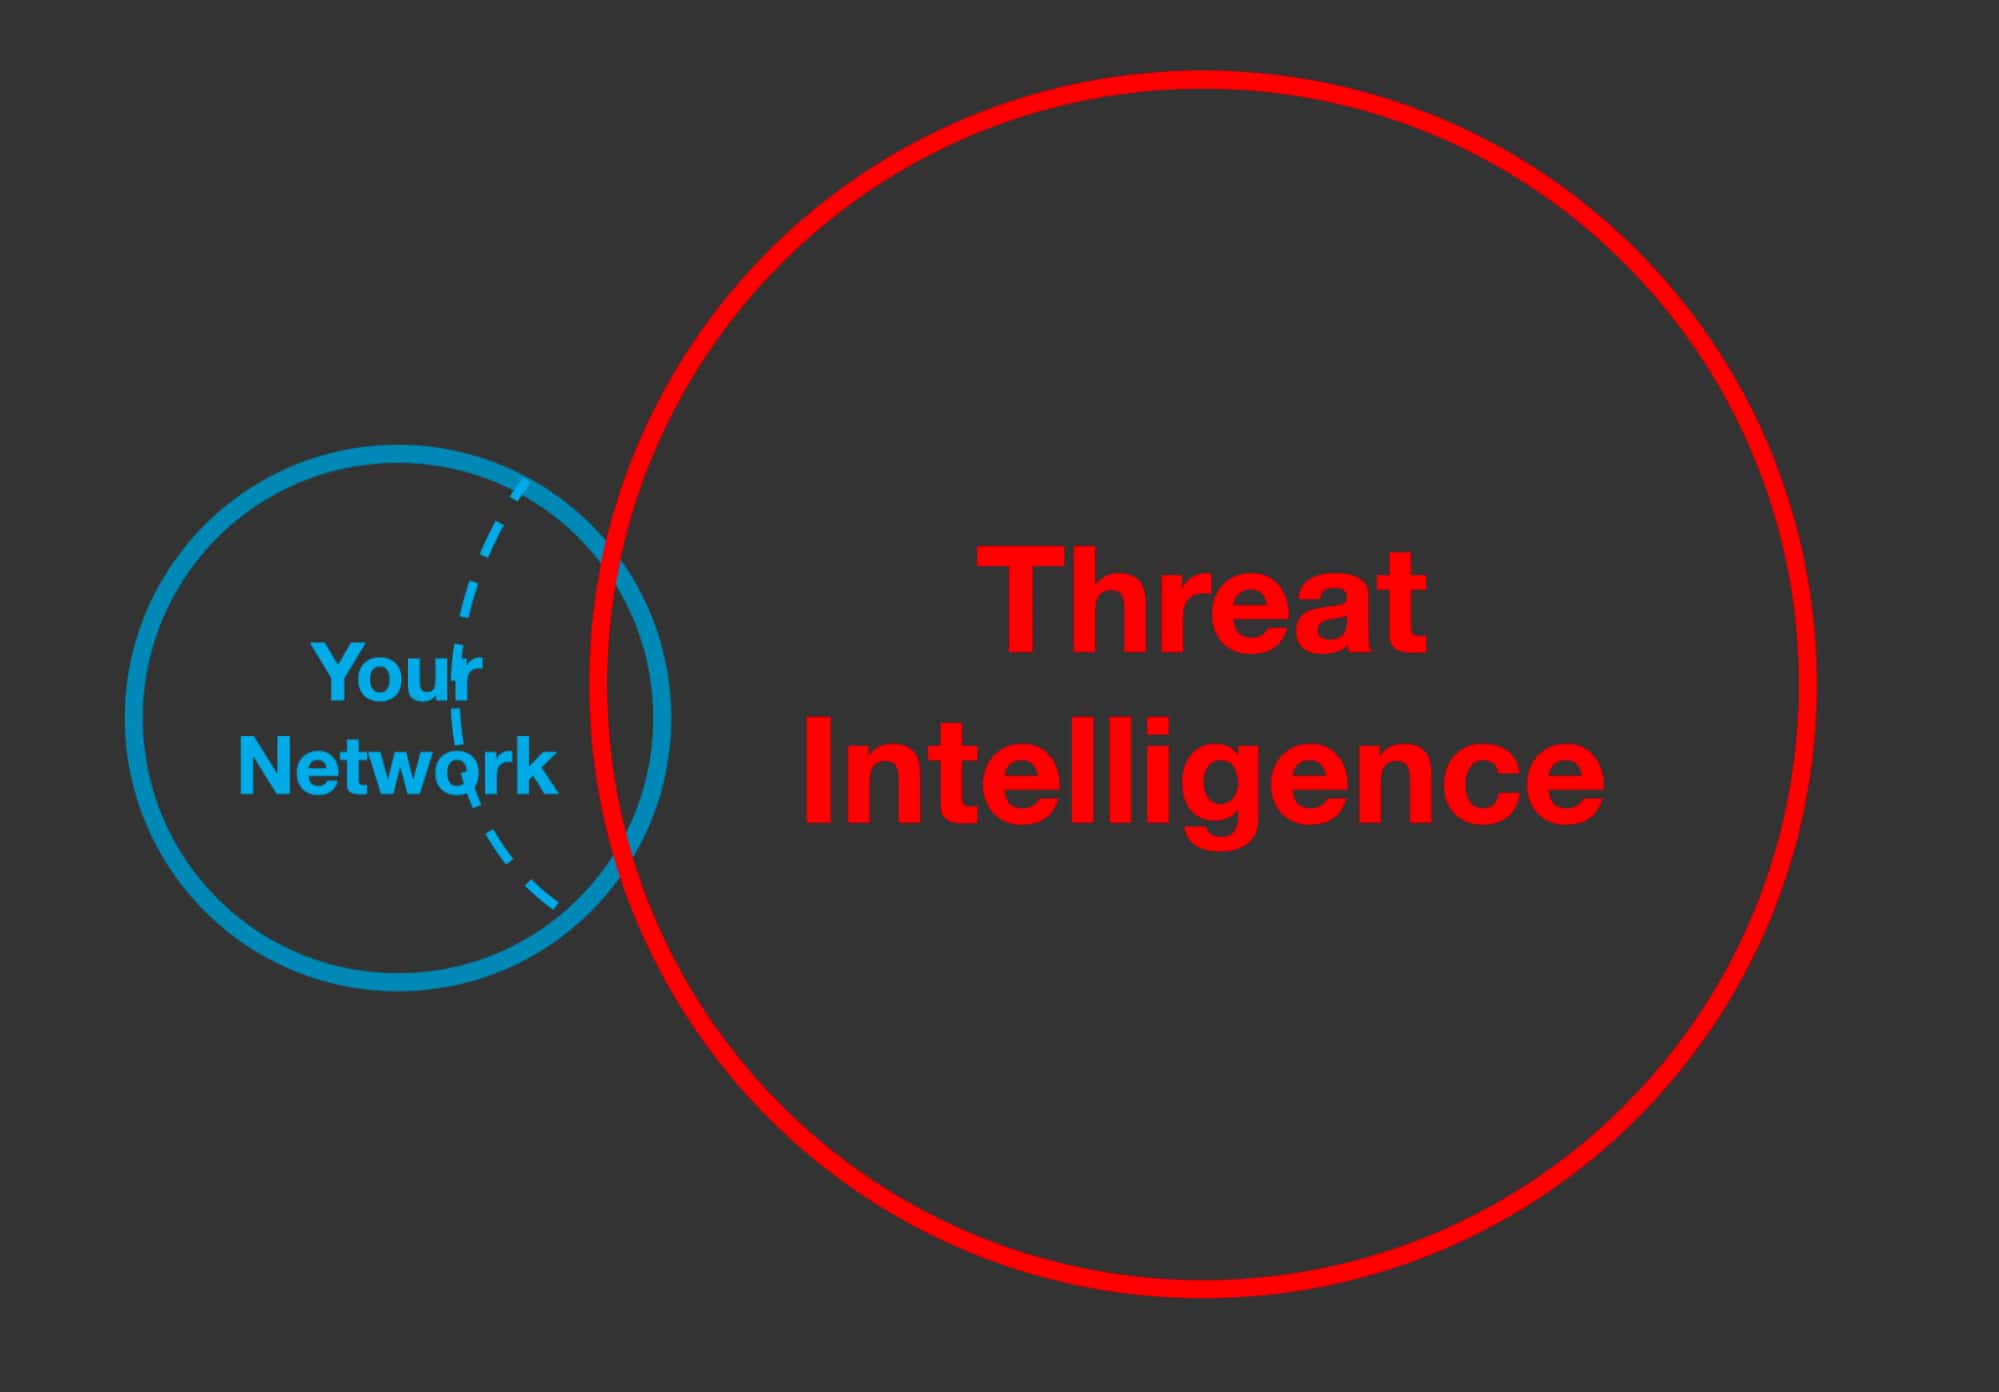 In this next version of the diagram, the area bounded by the dotted line represents threats that you should care about, but that you won’t find in intel feeds.